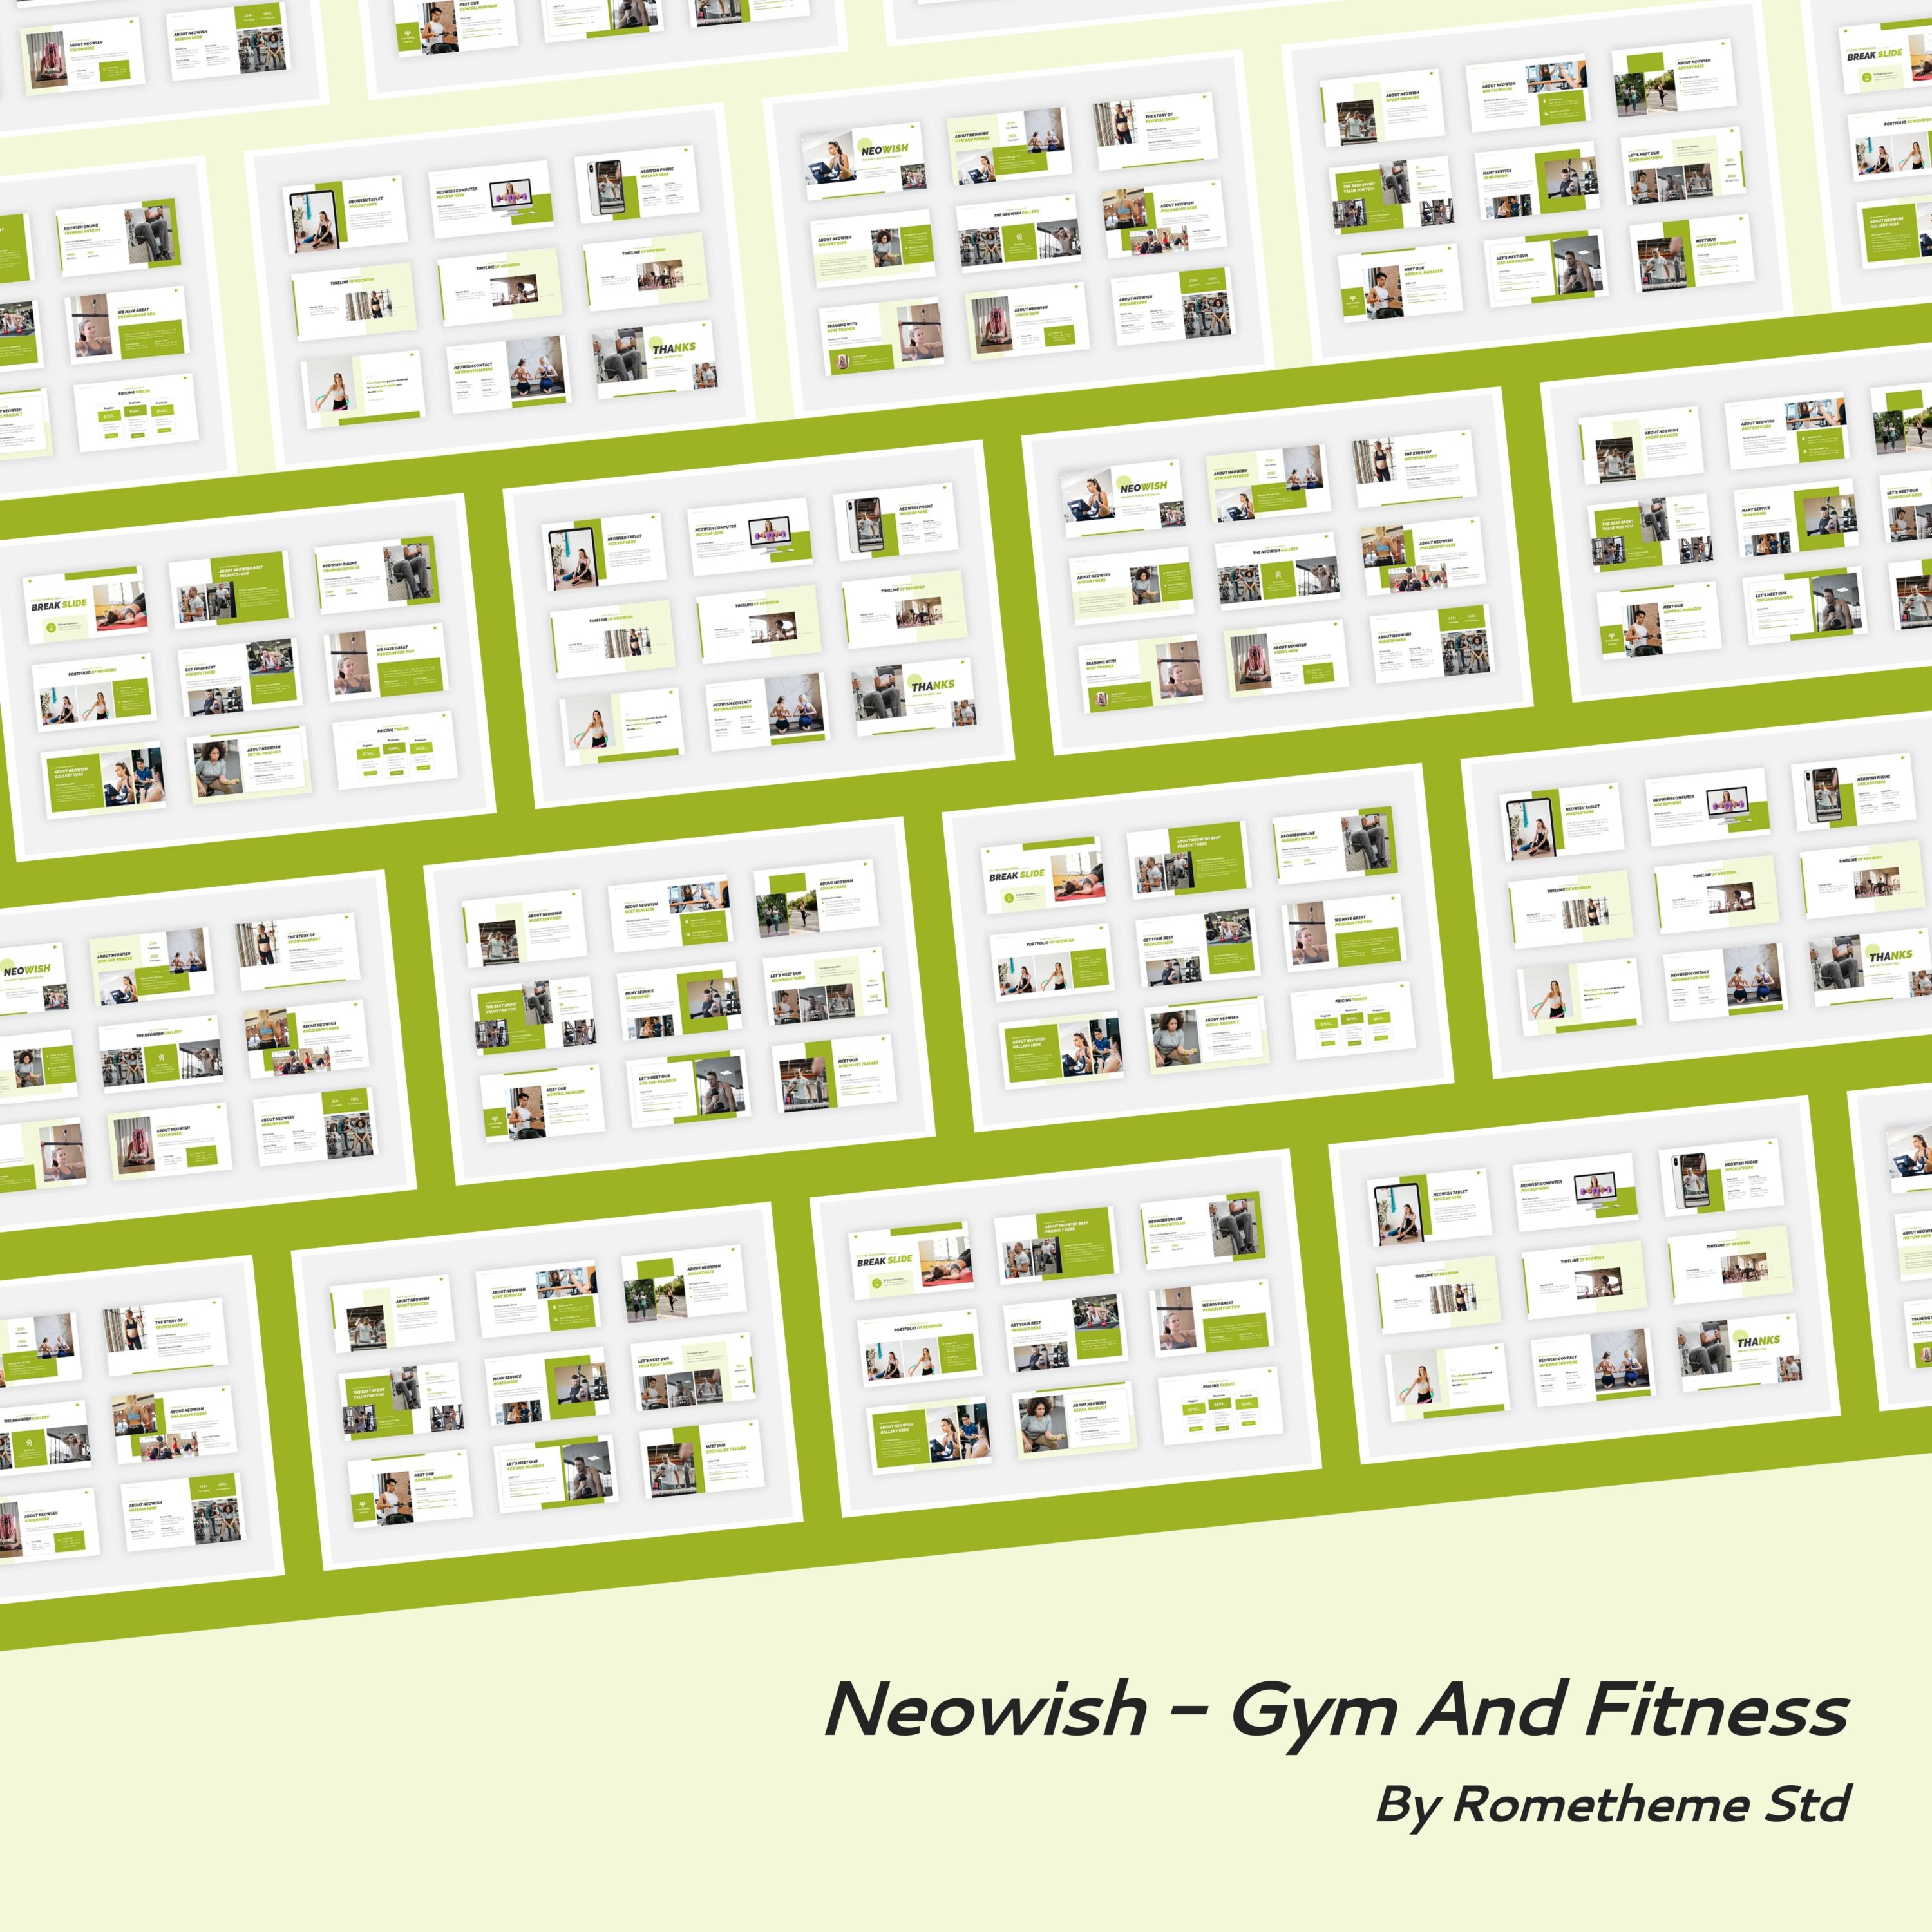 Neowish - Gym And Fitness cover.